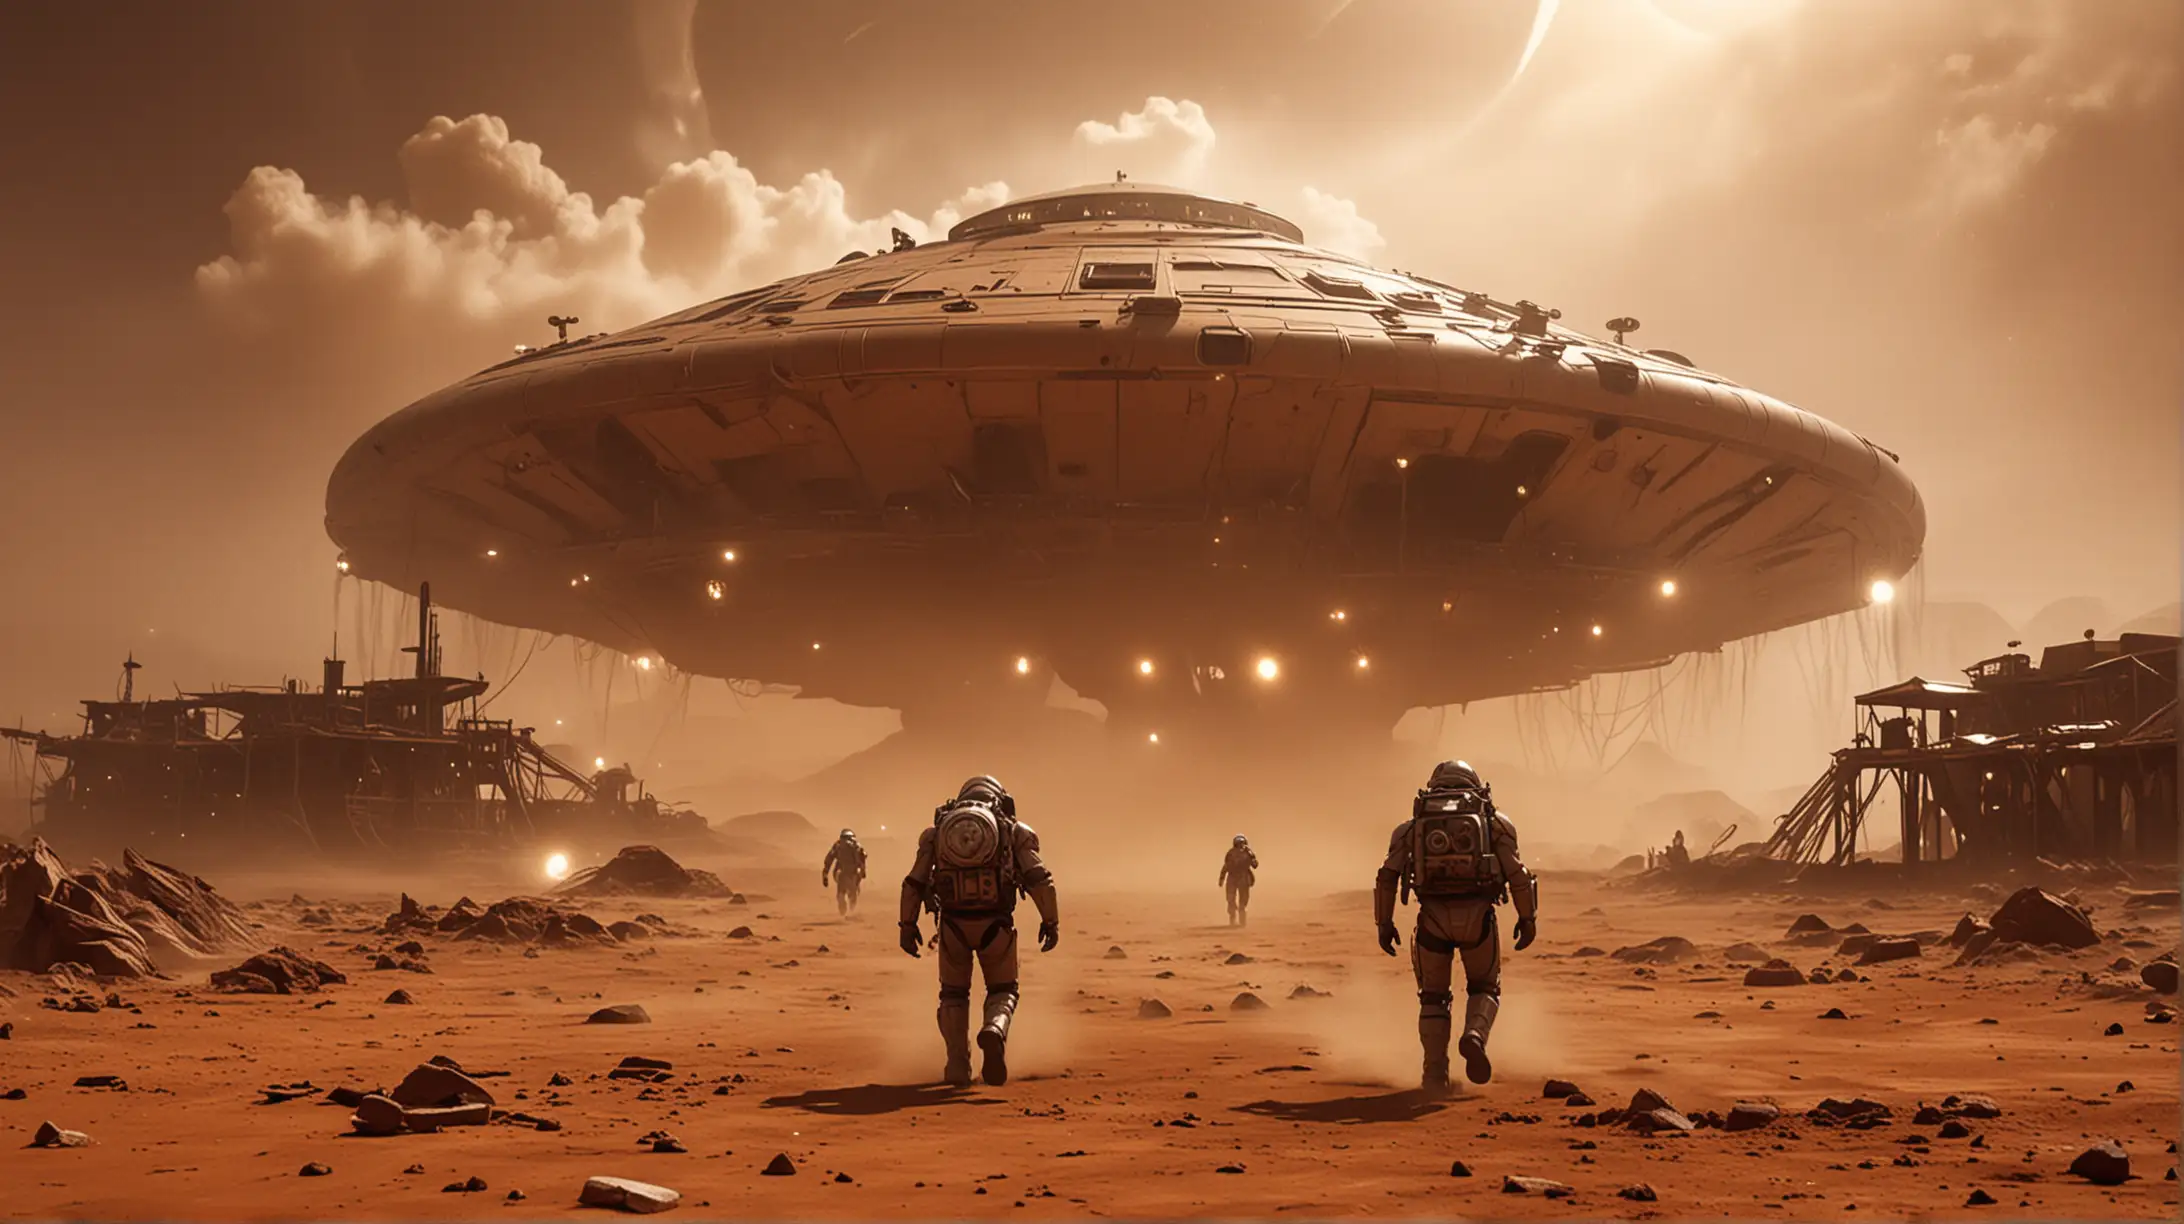 The great sandstorm on Mars destroys people's steampunk building complex, some people in spacesuits run towards a steampunk flying saucer, it is dark, all complex lights are on